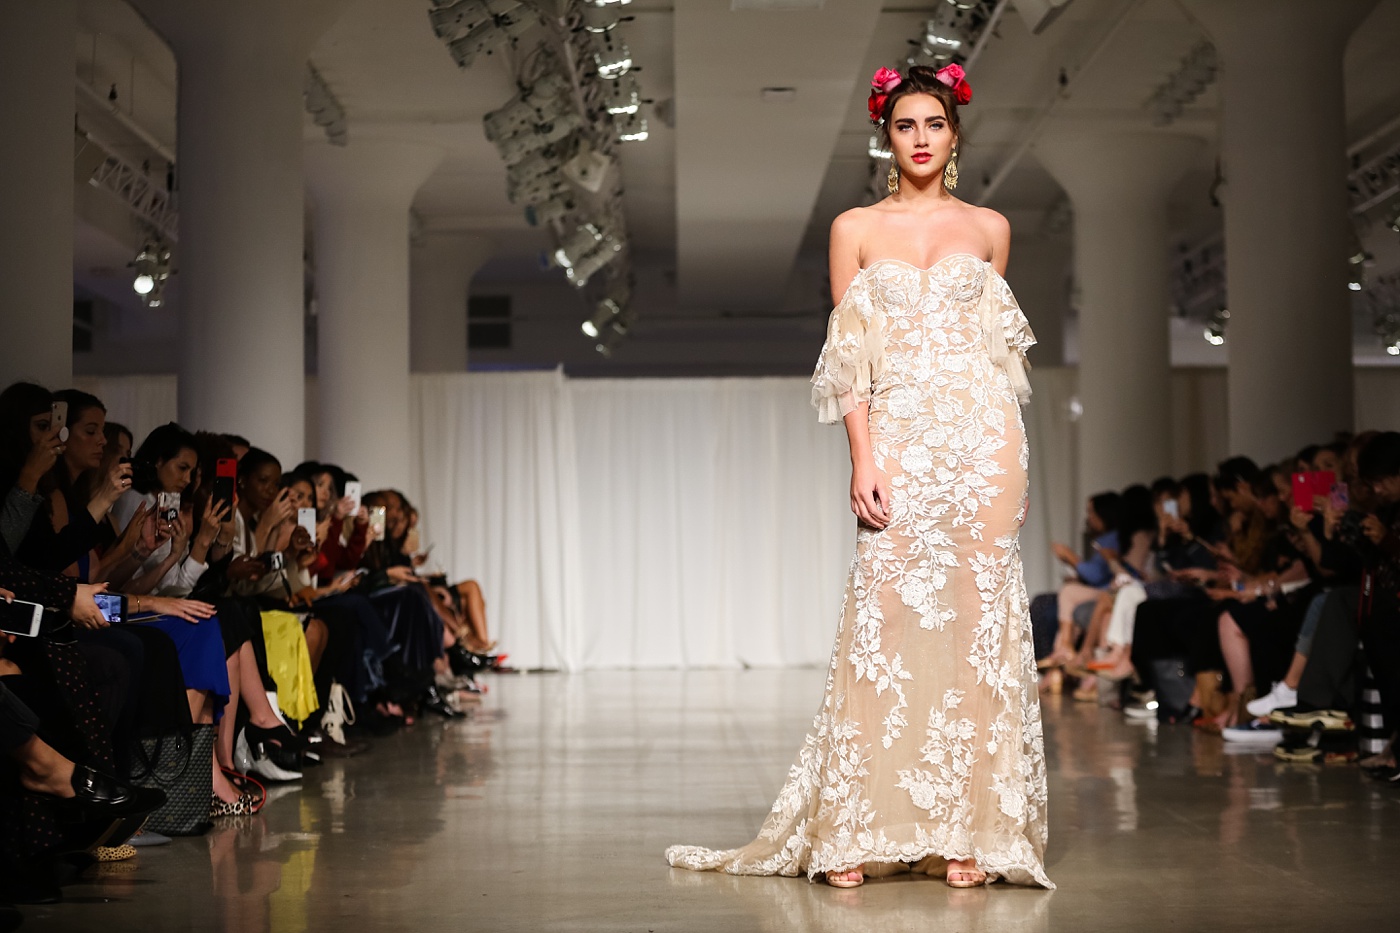 New-York-Bridal-Fashion-Week-Trend-Report-2018-Julie-Vino-Couture-San-Miguel-Photo-Jessica-Haley-Bridal